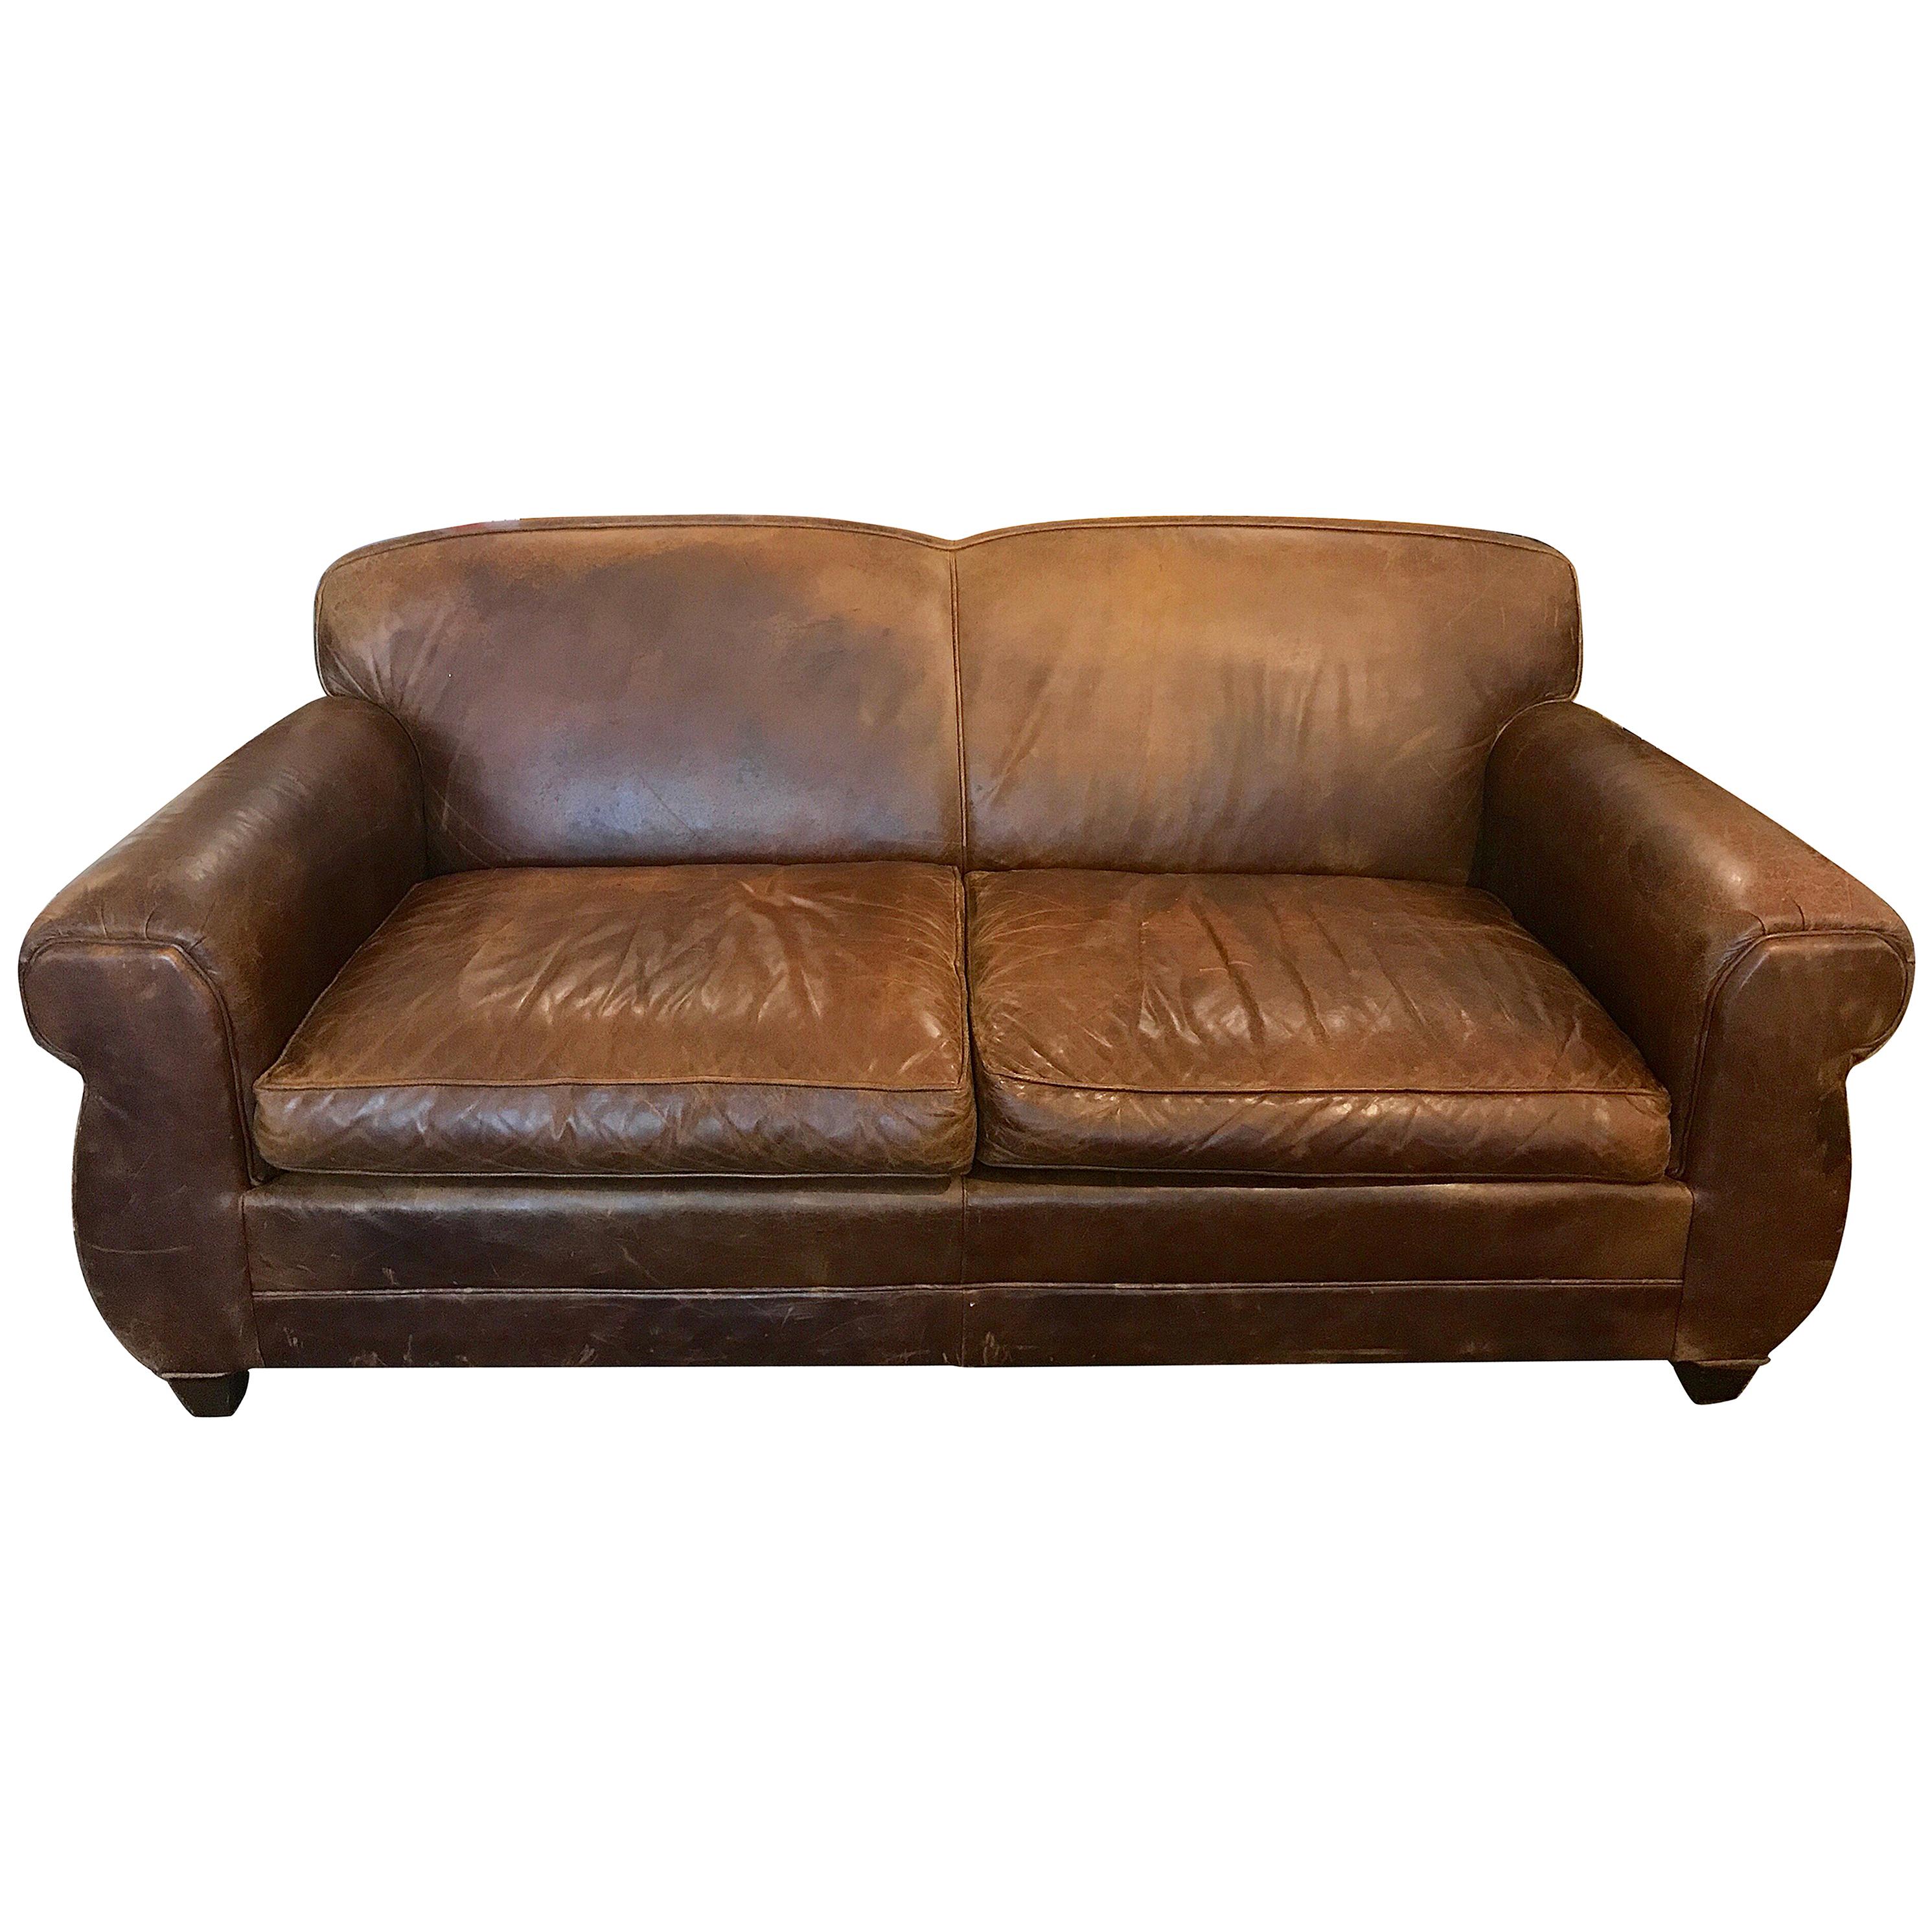 French Art Deco Style Distressed Leather Sofa For Sale